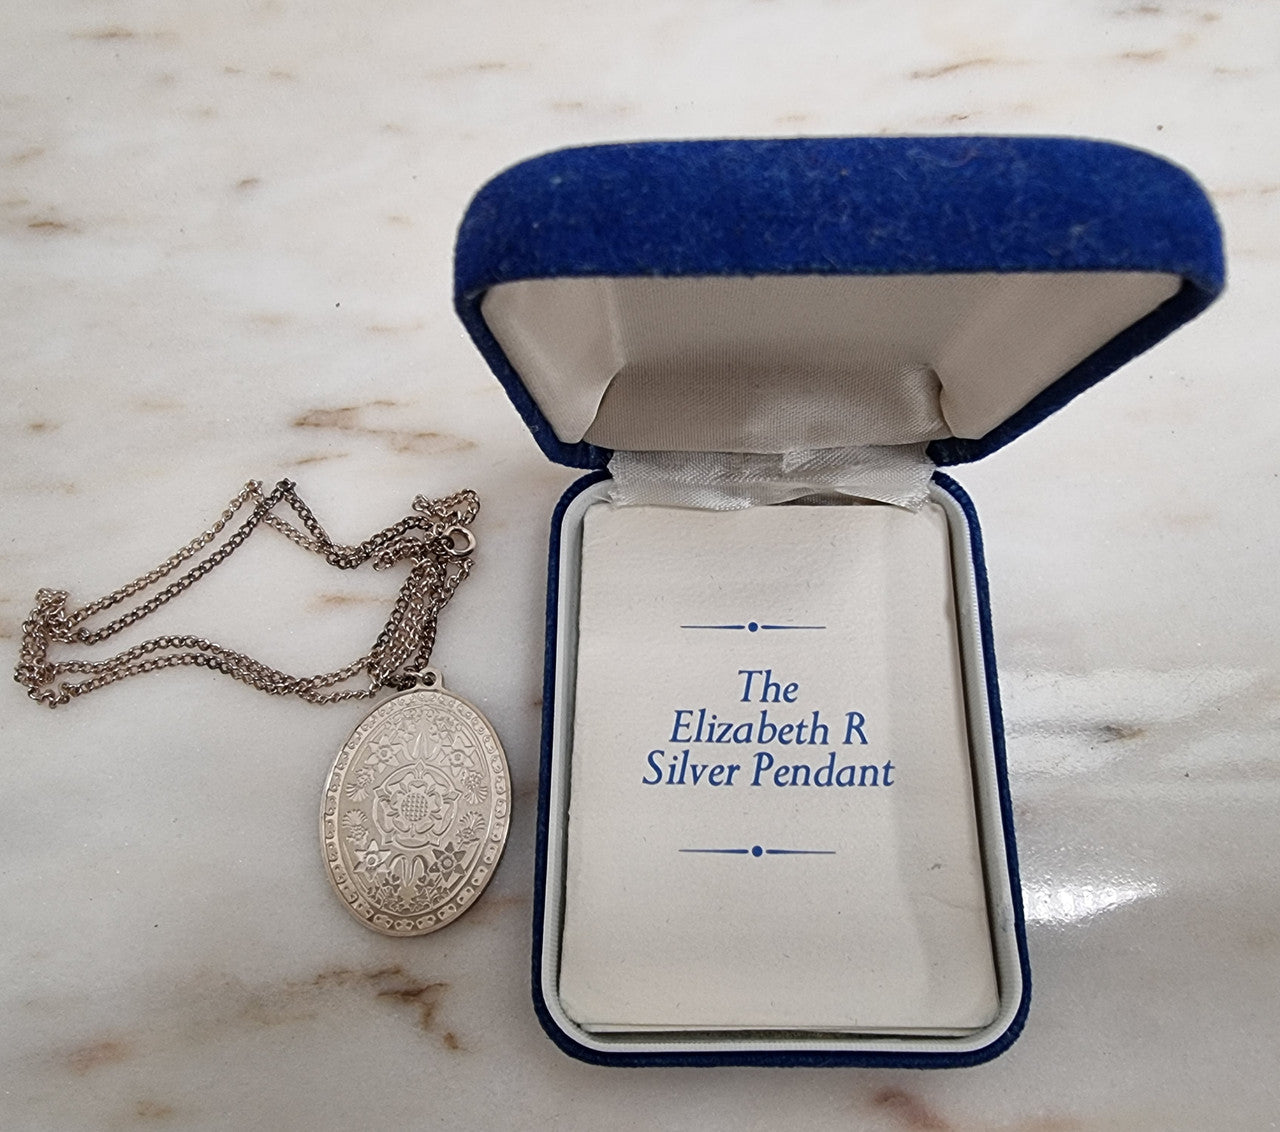 Attractive oval-shaped sterling silver ingot pendant issued by Franklin Mint in 1977 to commemorate Queen Elizabeth II Silver Jubilee. It comes with its original box and paperwork.